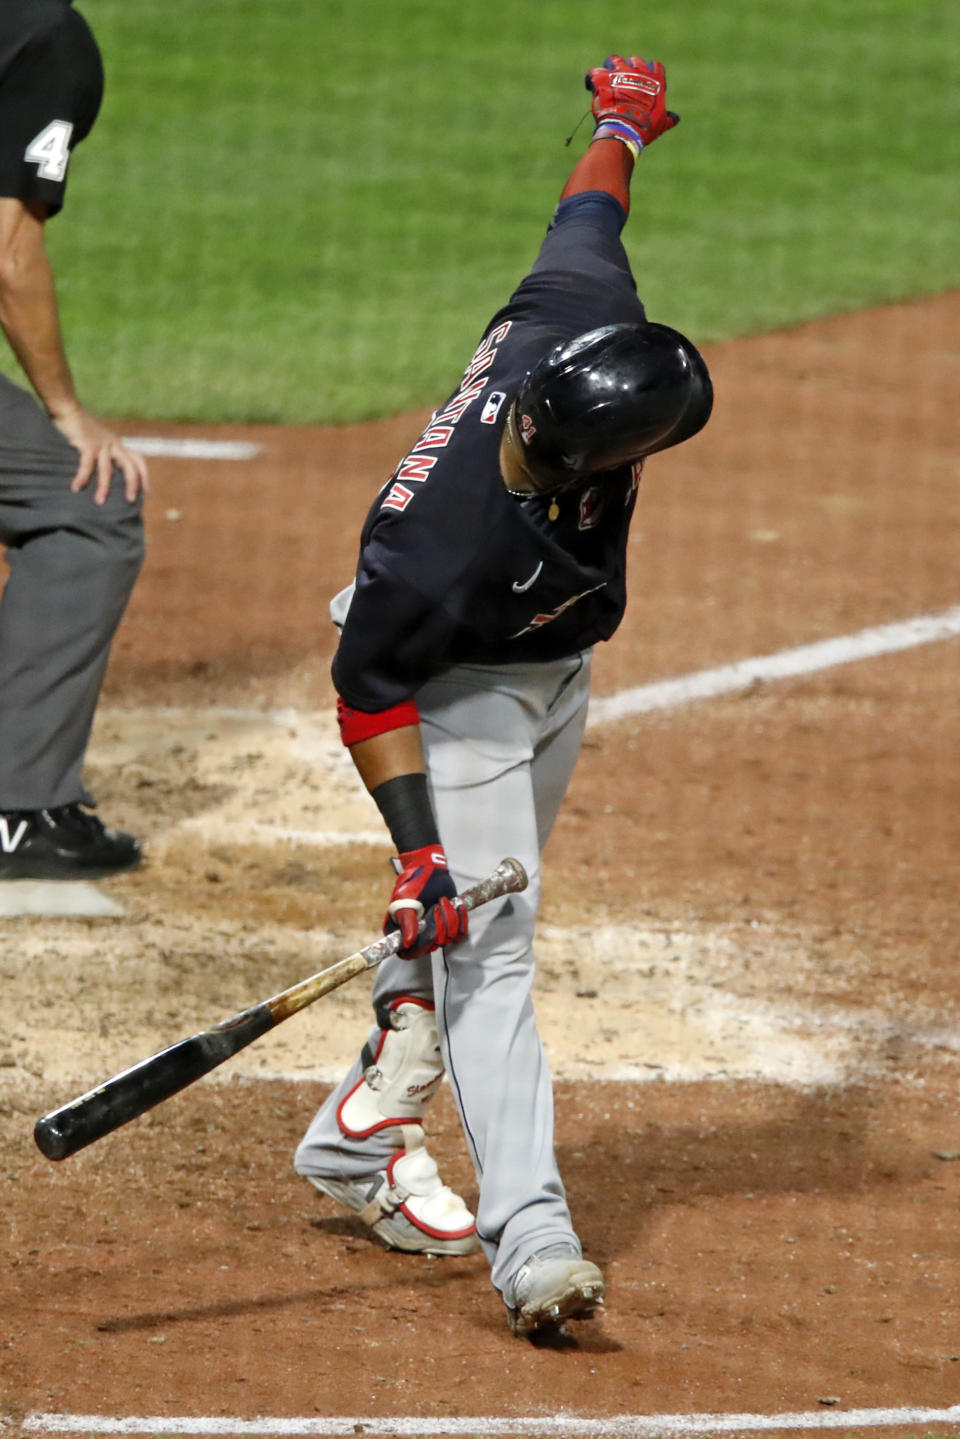 Cleveland Indians' Carlos Santana watches his three-run home run clear the left-field foul pole during the tenth inning of a baseball game against the Pittsburgh Pirates in Pittsburgh, Tuesday, Aug. 18, 2020. (AP Photo/Gene J. Puskar)